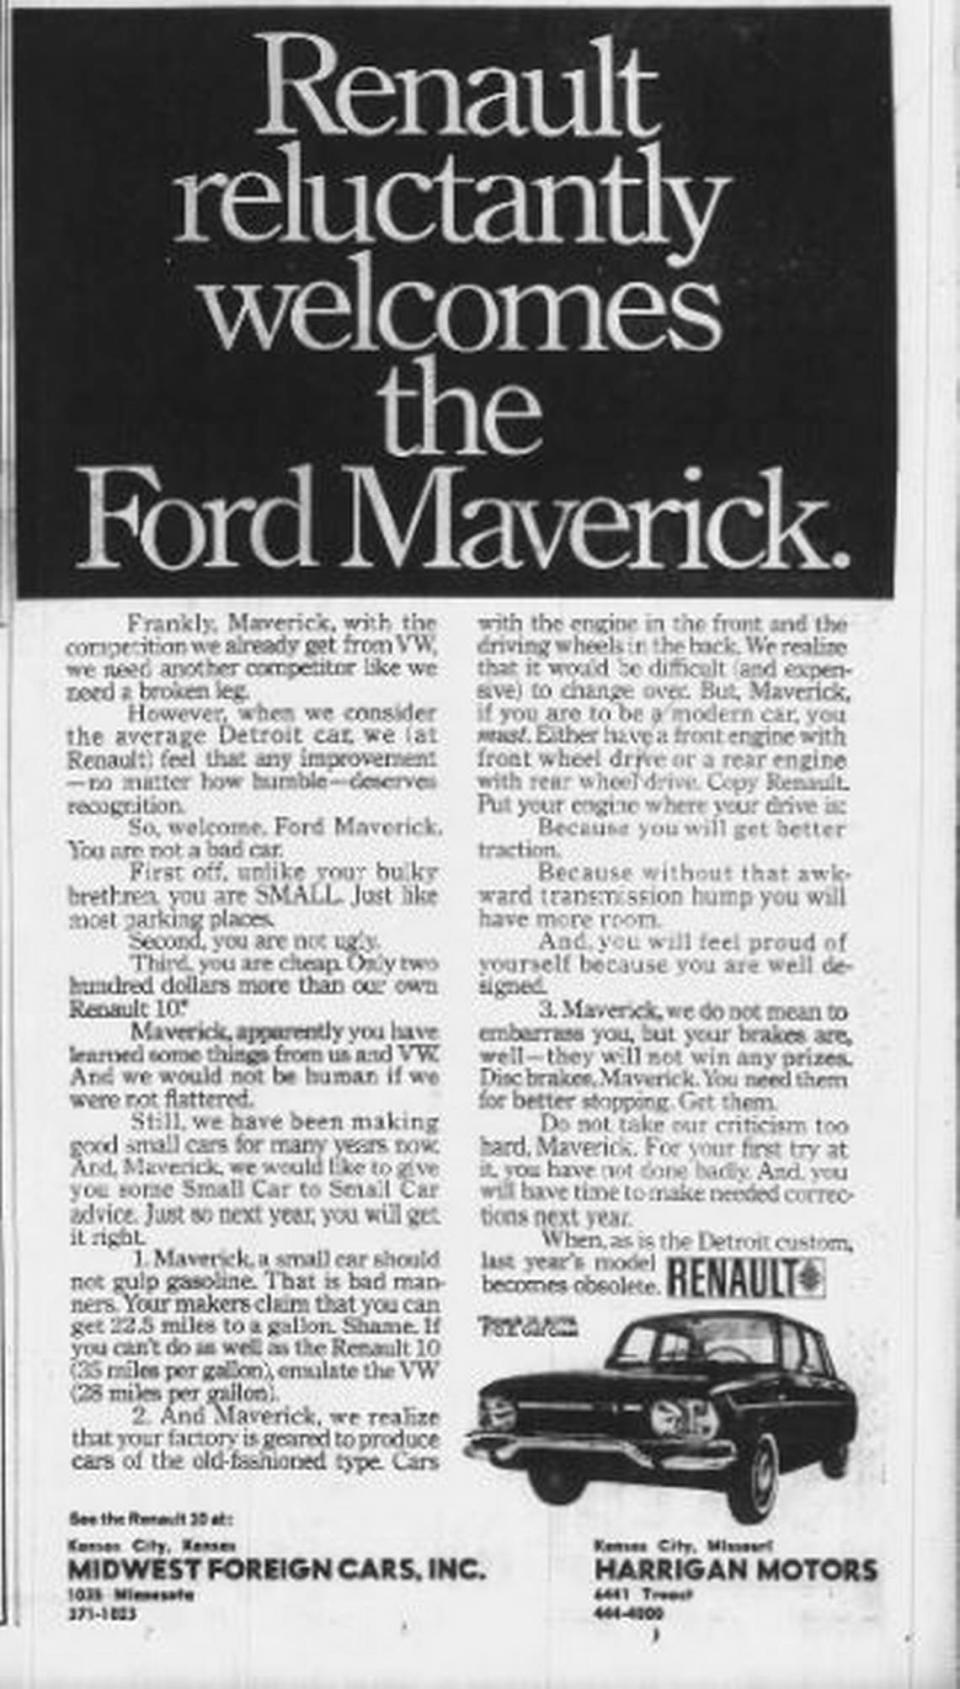 Renault “welcomes” the Ford Maverick, made in Kansas City, with a lampoon ad in The Kansas City Star on April 17, 1969